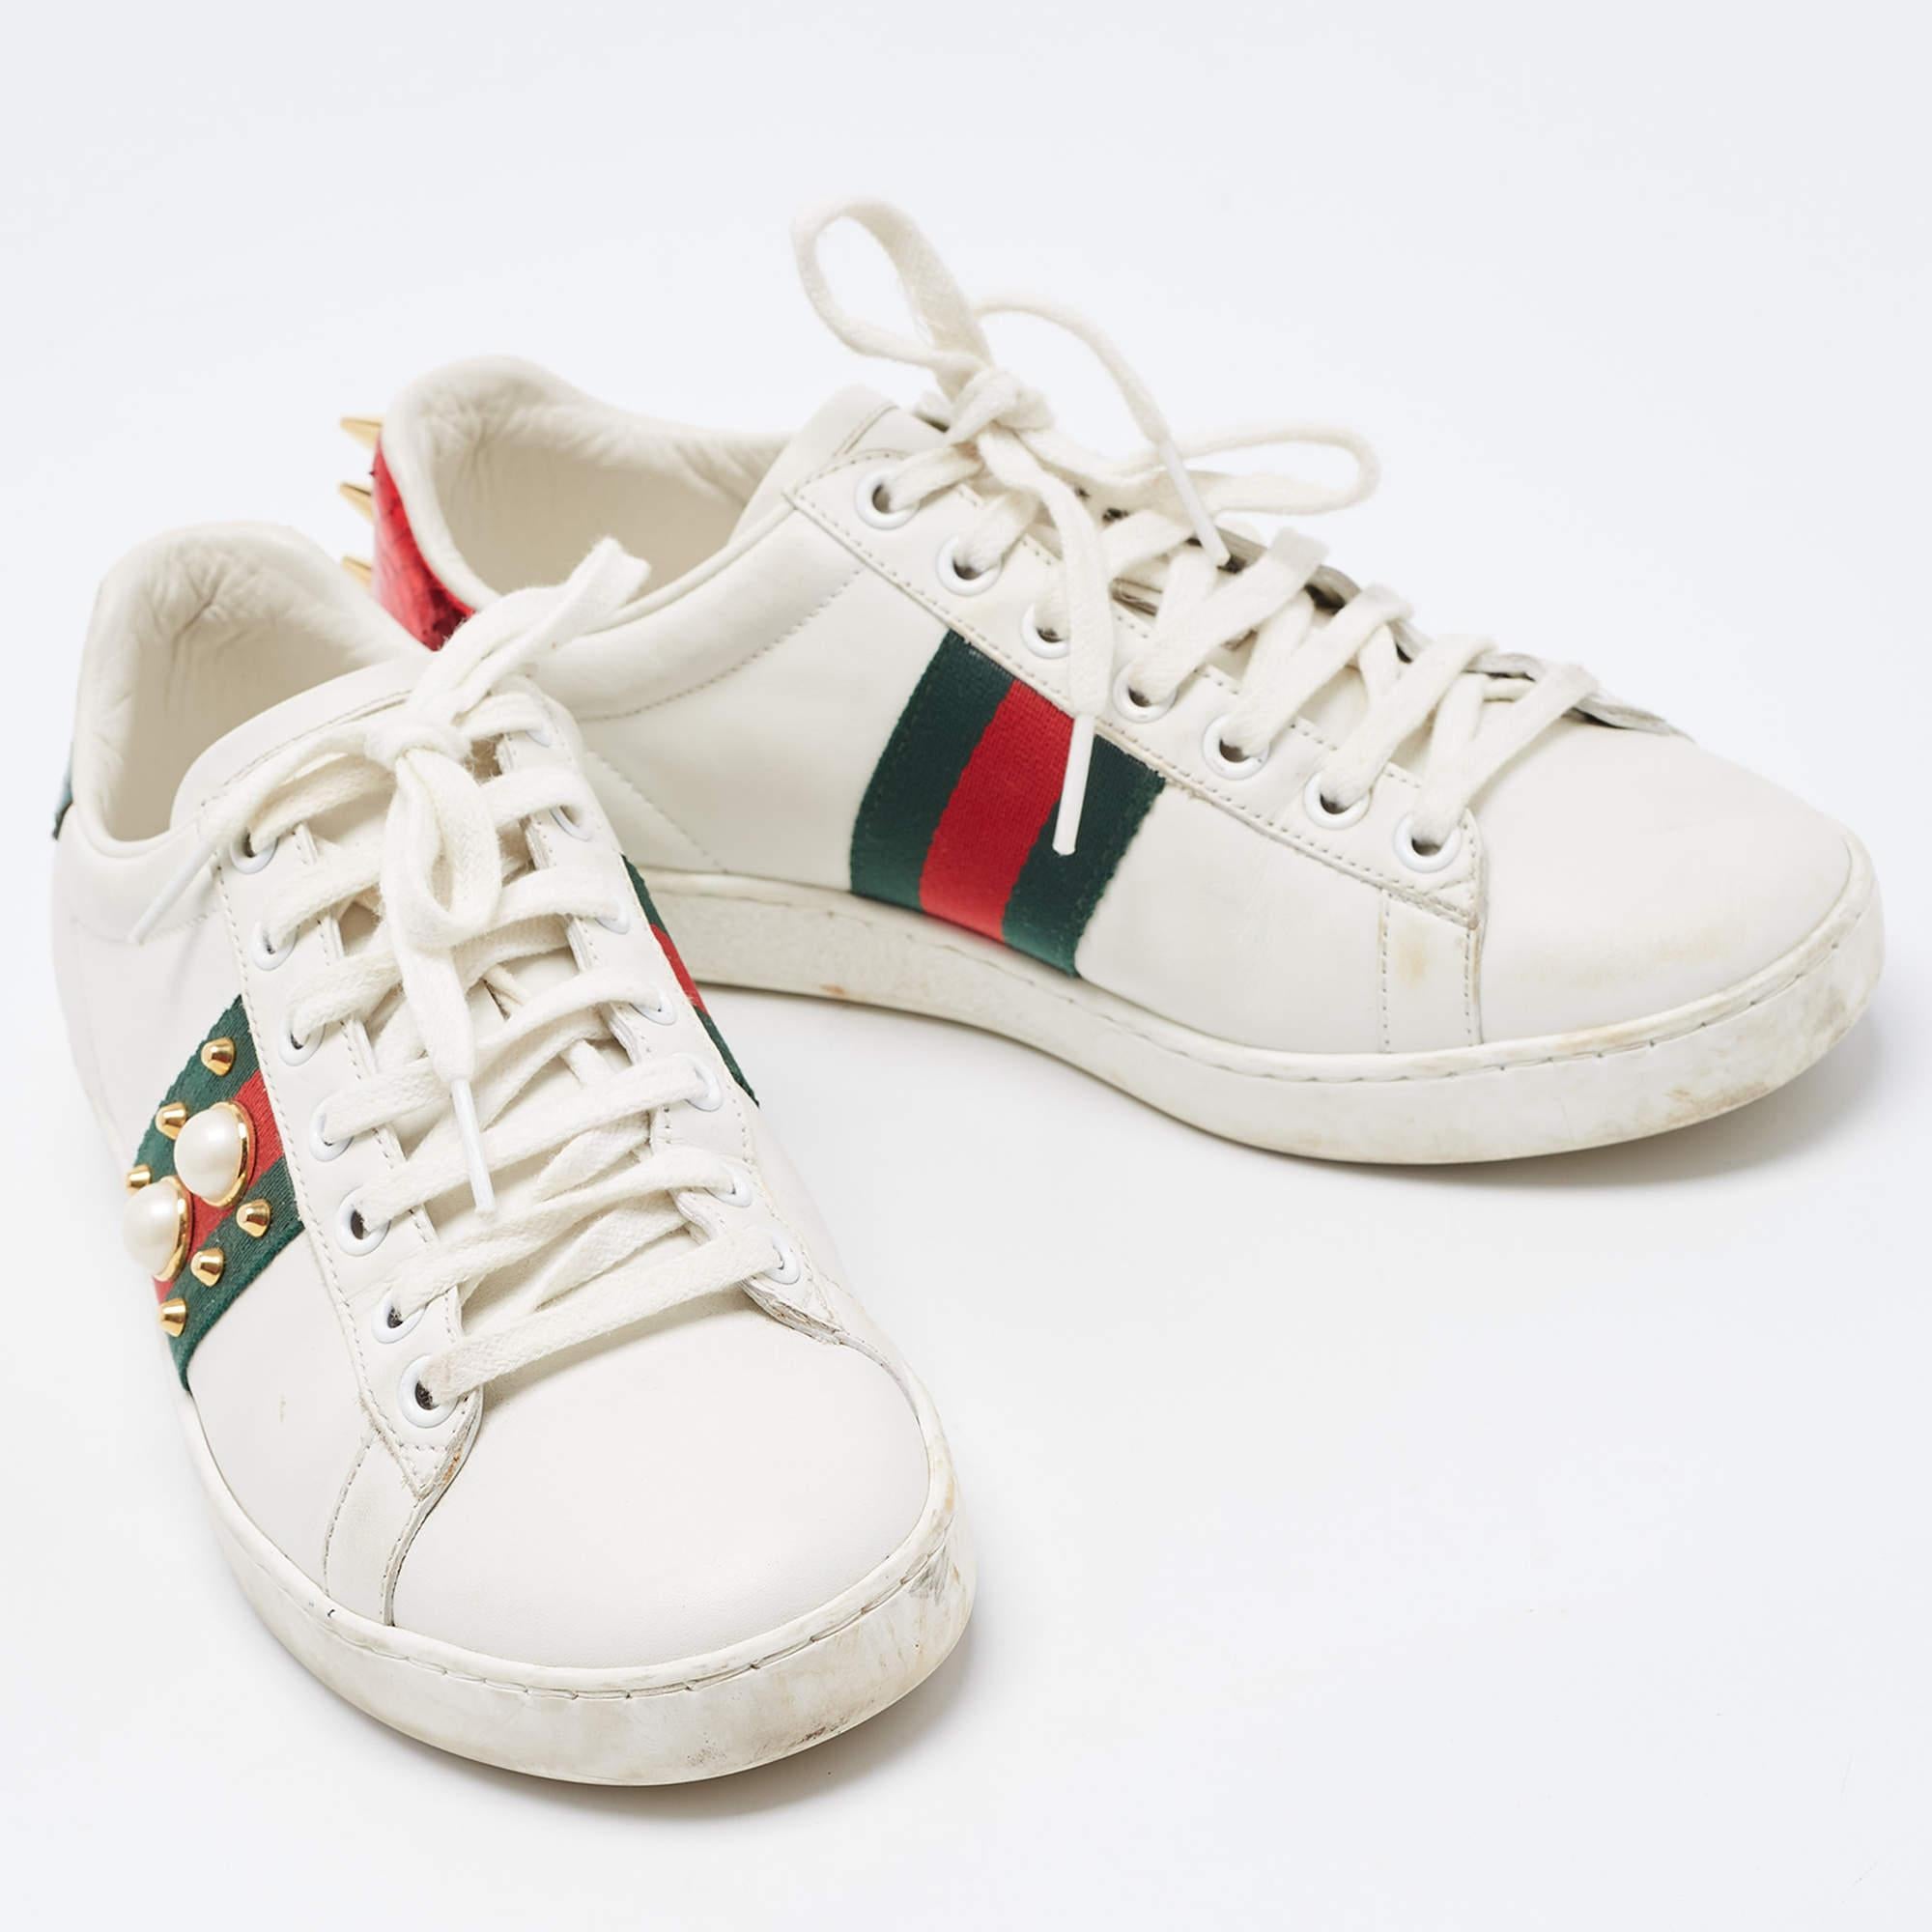 Gucci White Leather Studded and Spiked Ace Sneakers Size 36 In Good Condition For Sale In Dubai, Al Qouz 2